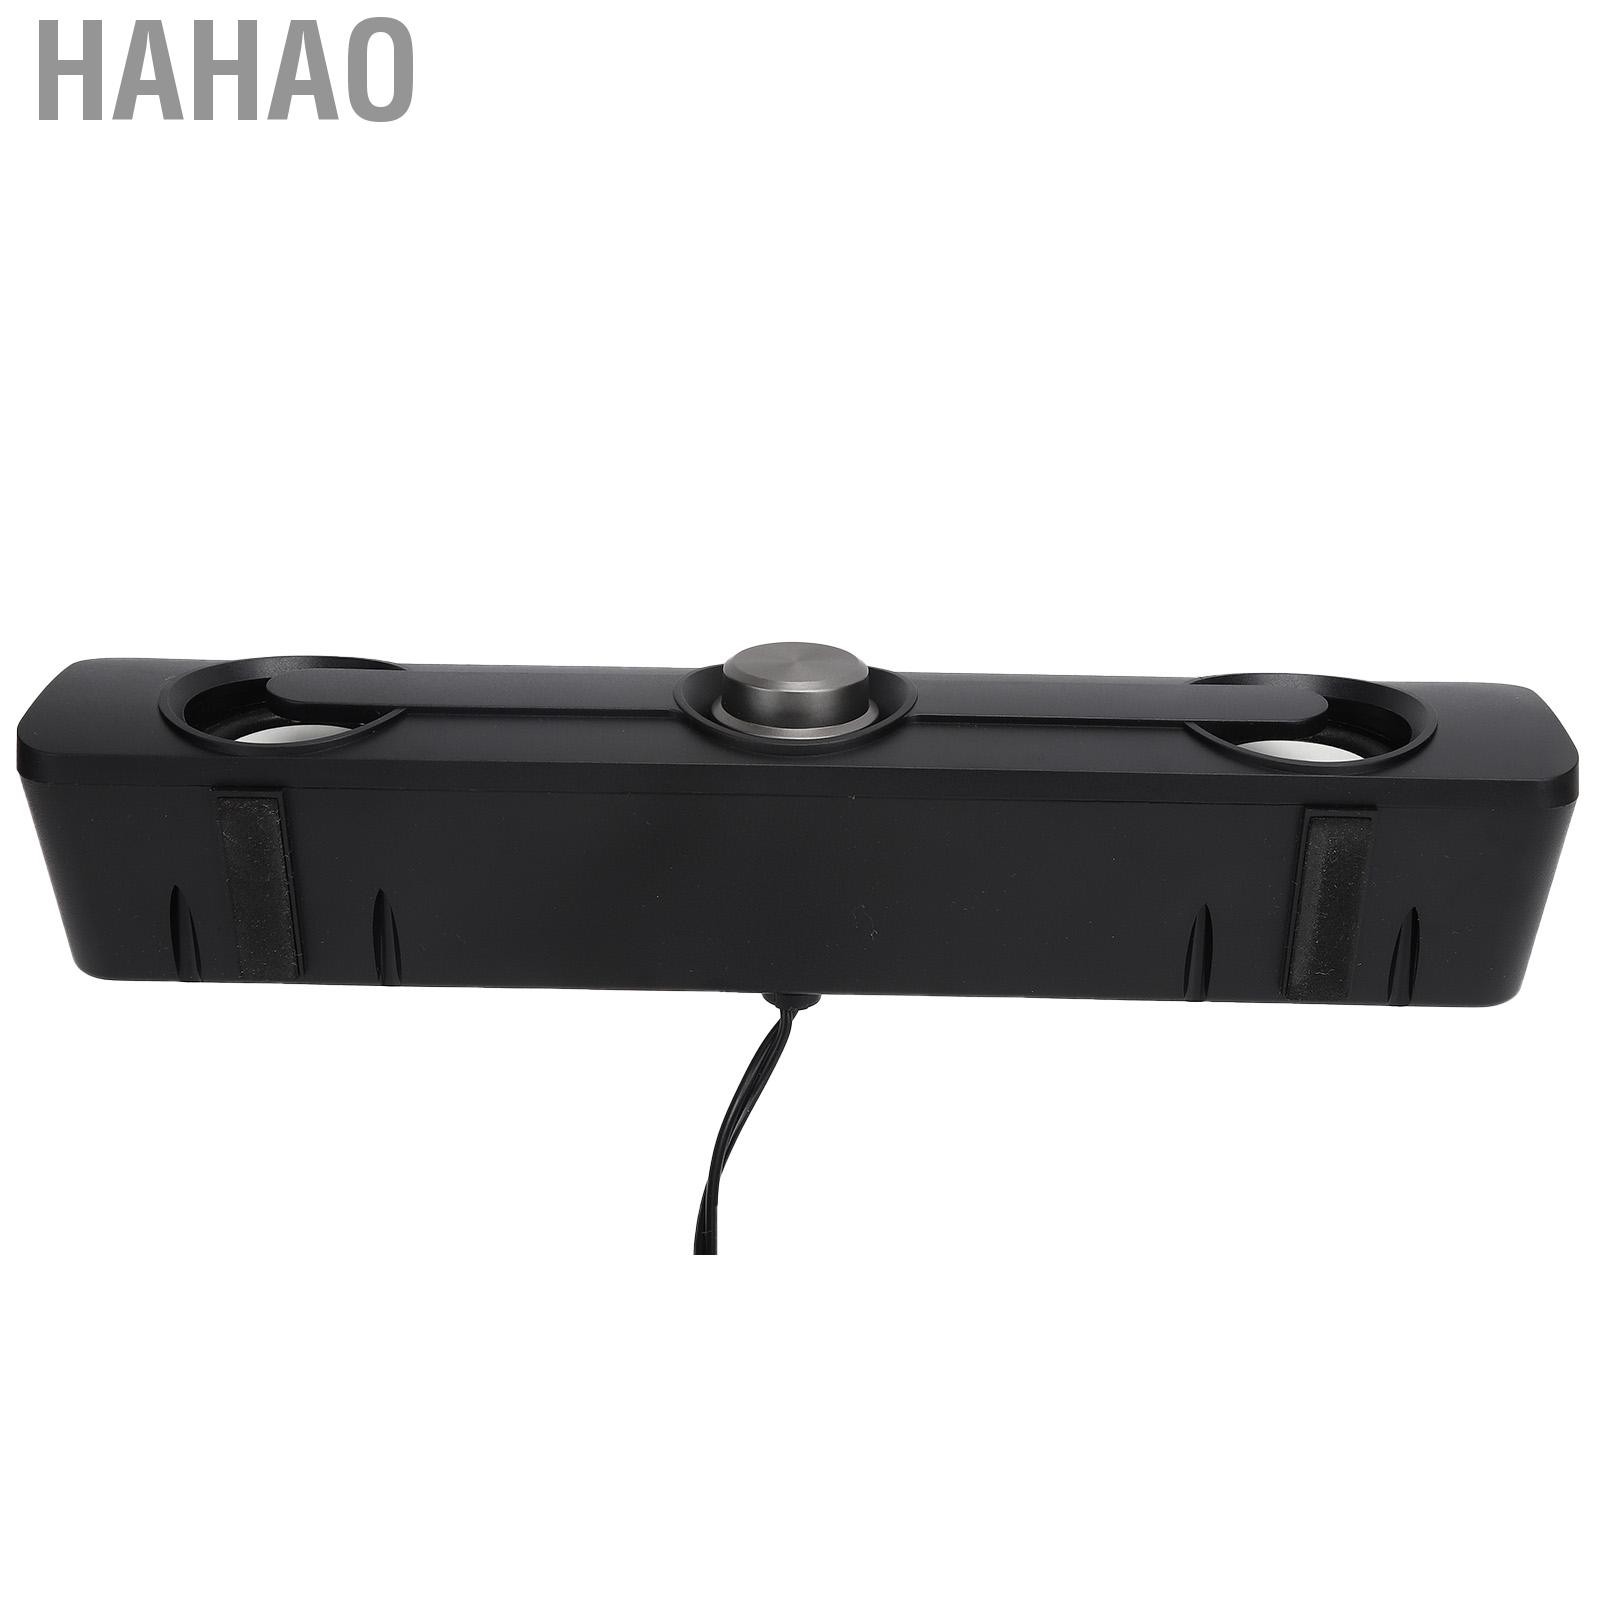 Hahao Bluetooth Computer Audio Speaker Subwoofer USB Large Volume for Home Party Dormitory